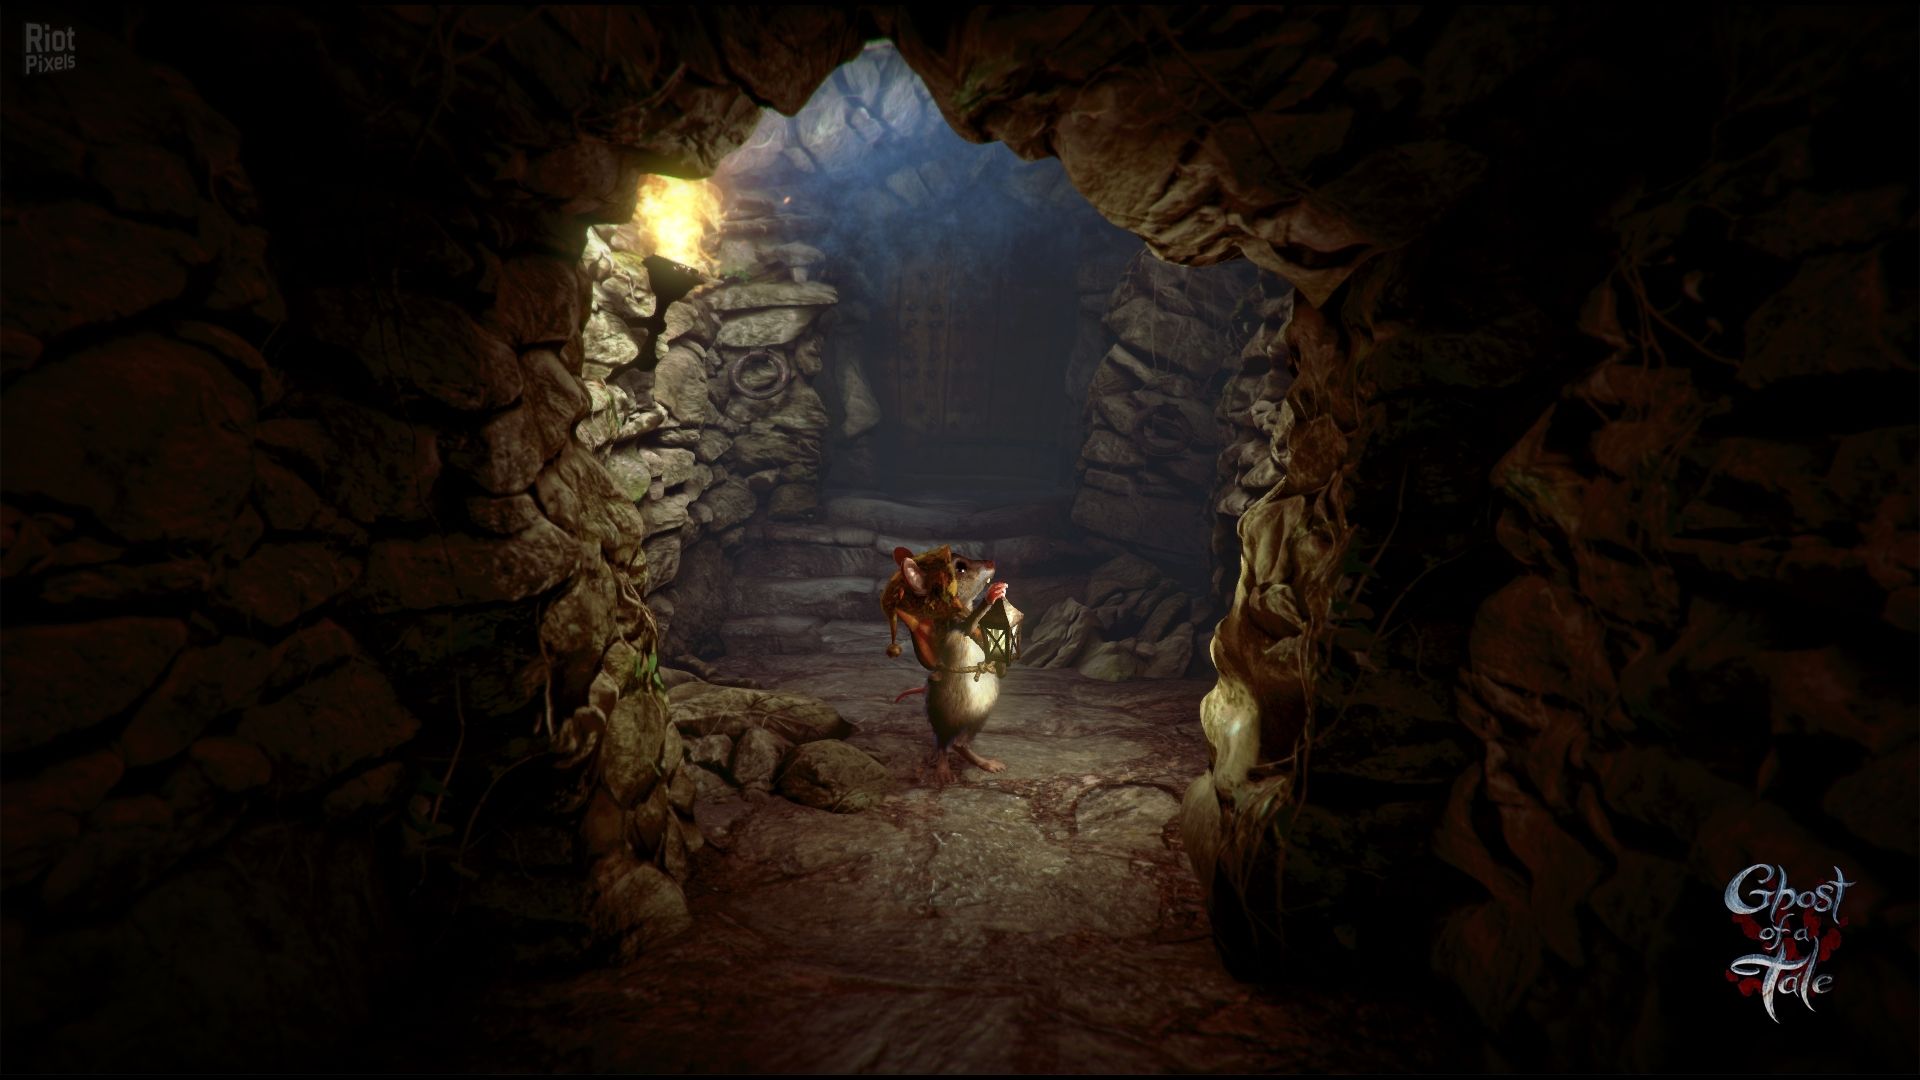 Wallpaper from Ghost of a Tale